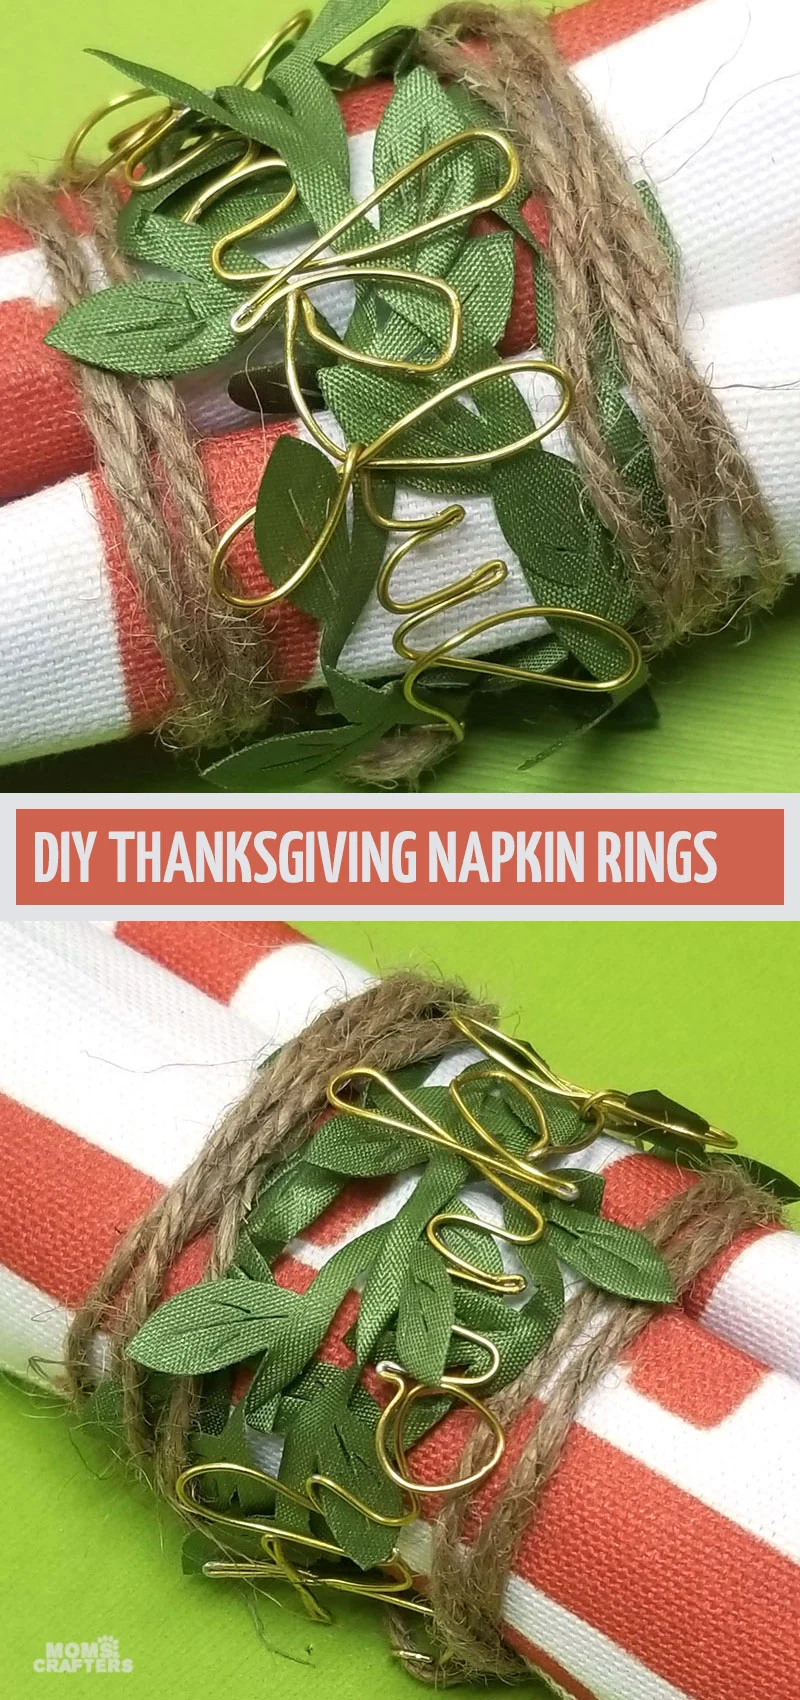 Craft some DIY Thanksgiving napkin rings with leaves and twine and a gorgeous fall themed table setting! You can turn these into names instead of placecards. They make stunning table decorations!